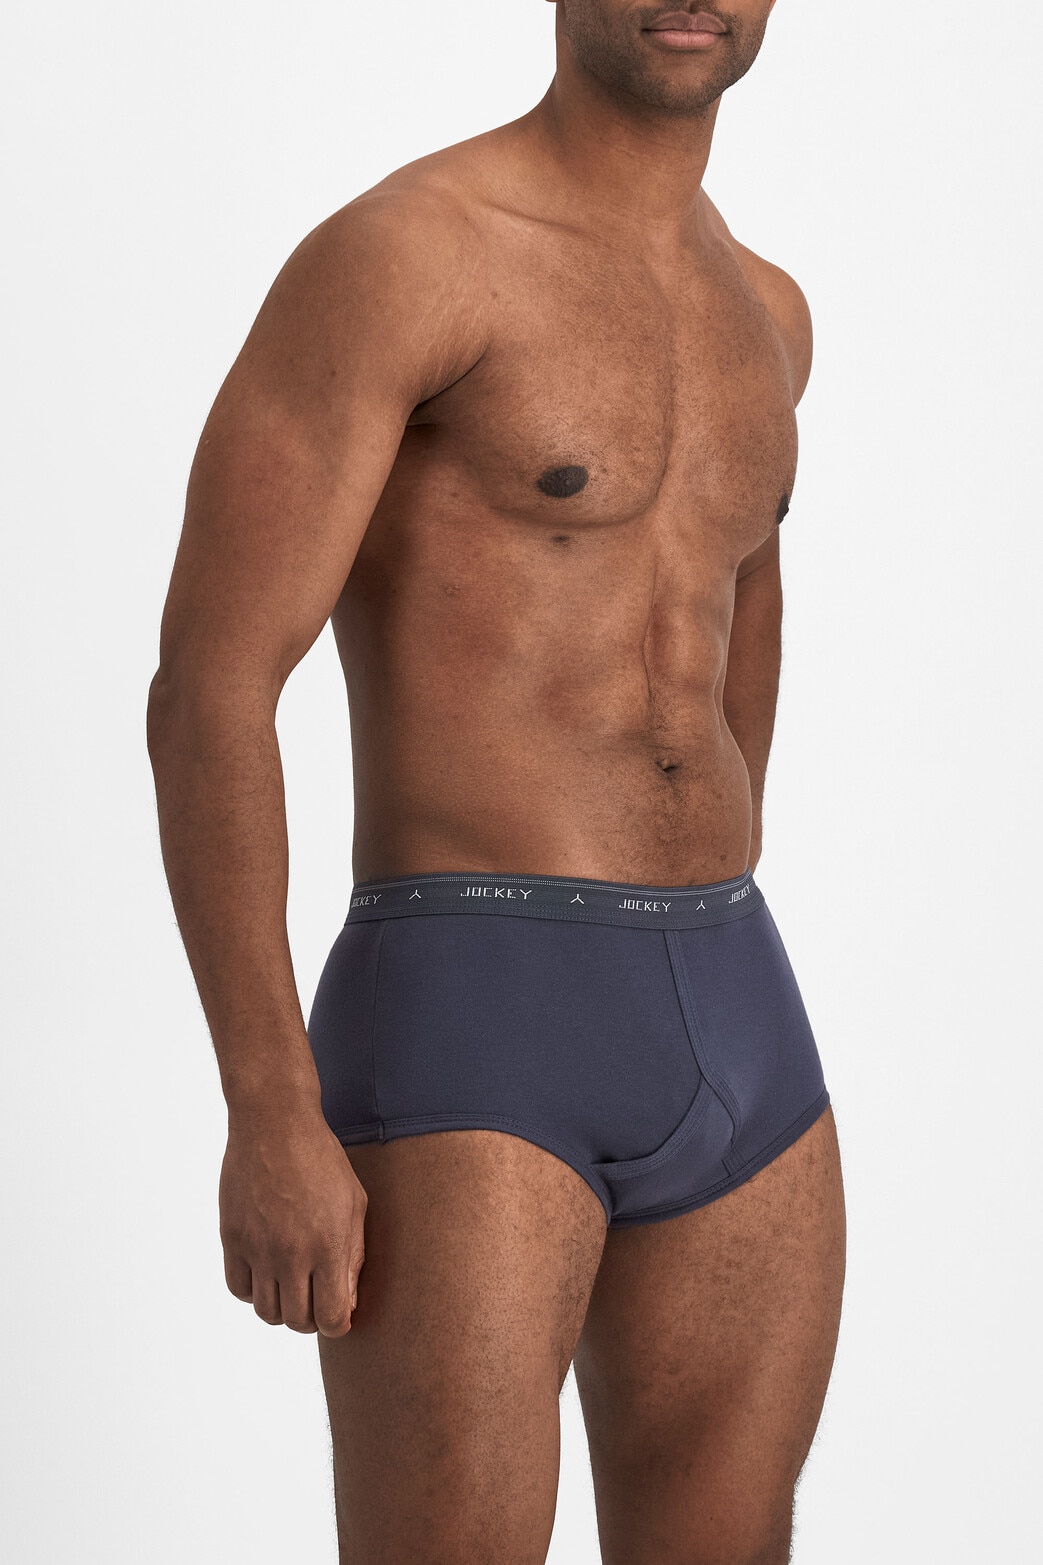 Jockey 2 Pack Y-Front Eyelet Briefs for Sale ✔️ Lowest Price